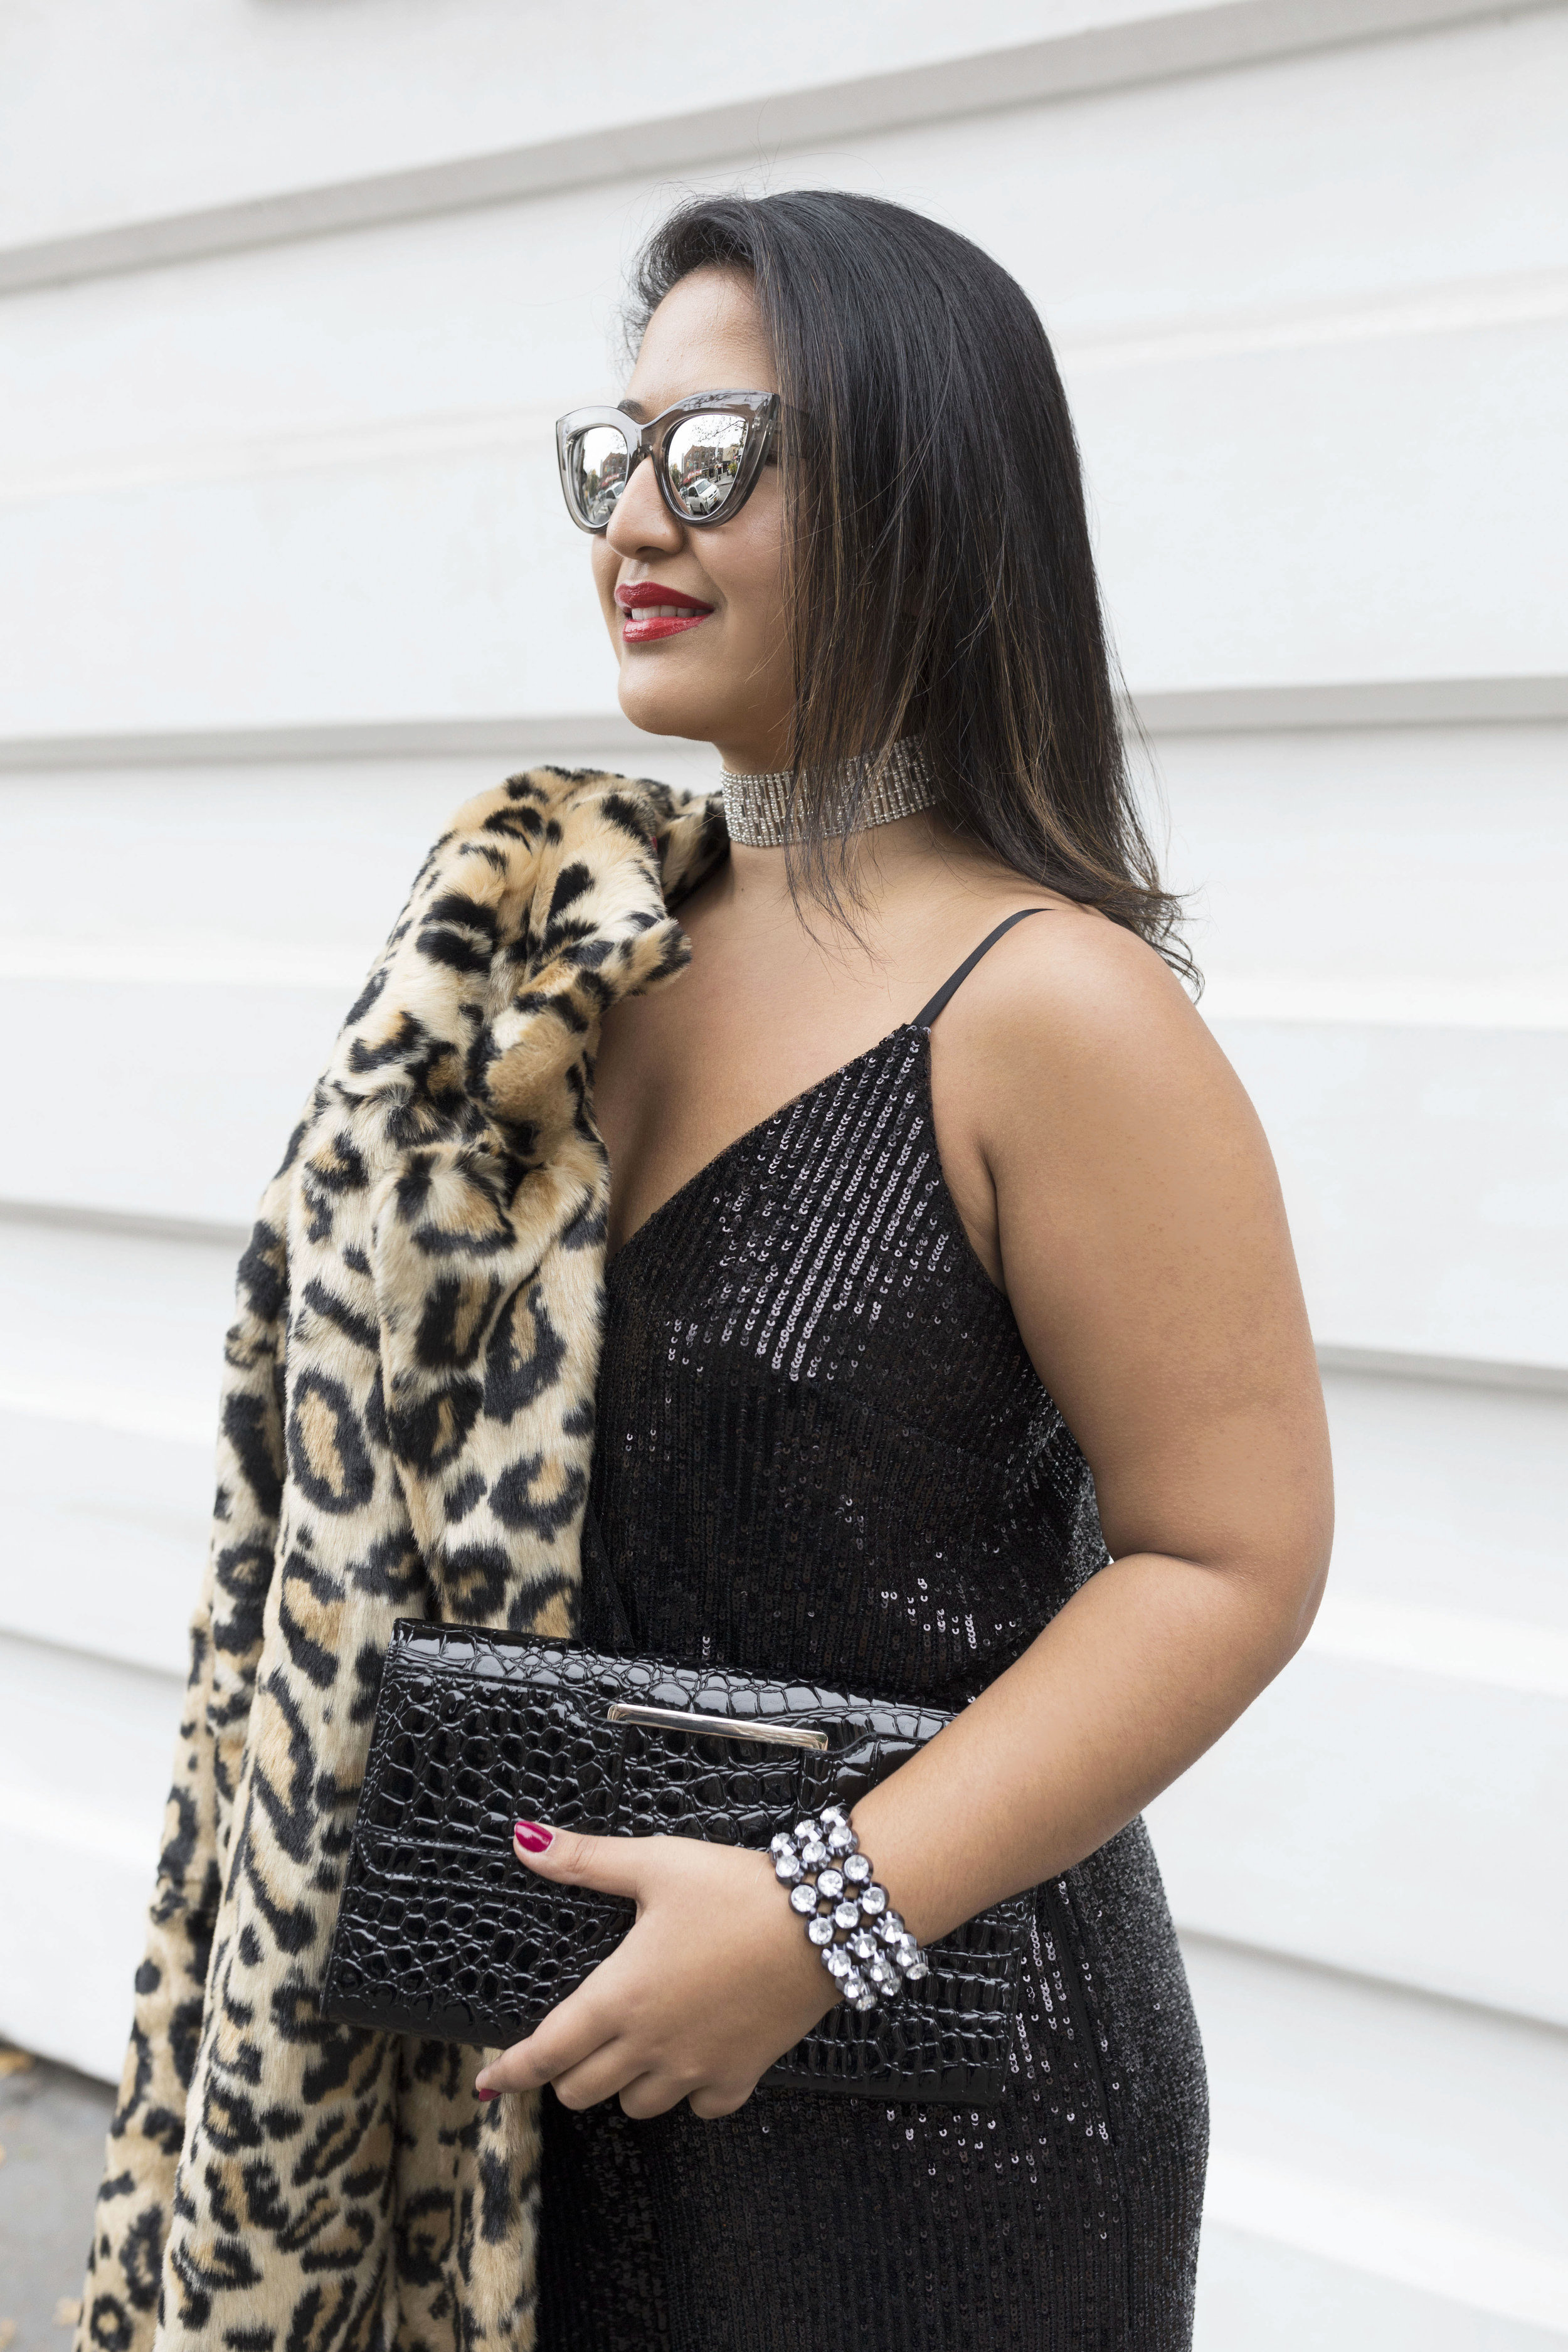 Krity S x New Years Eve Outfit x Sequin Jumpsuit and Cheetah Faux Fur5.jpg